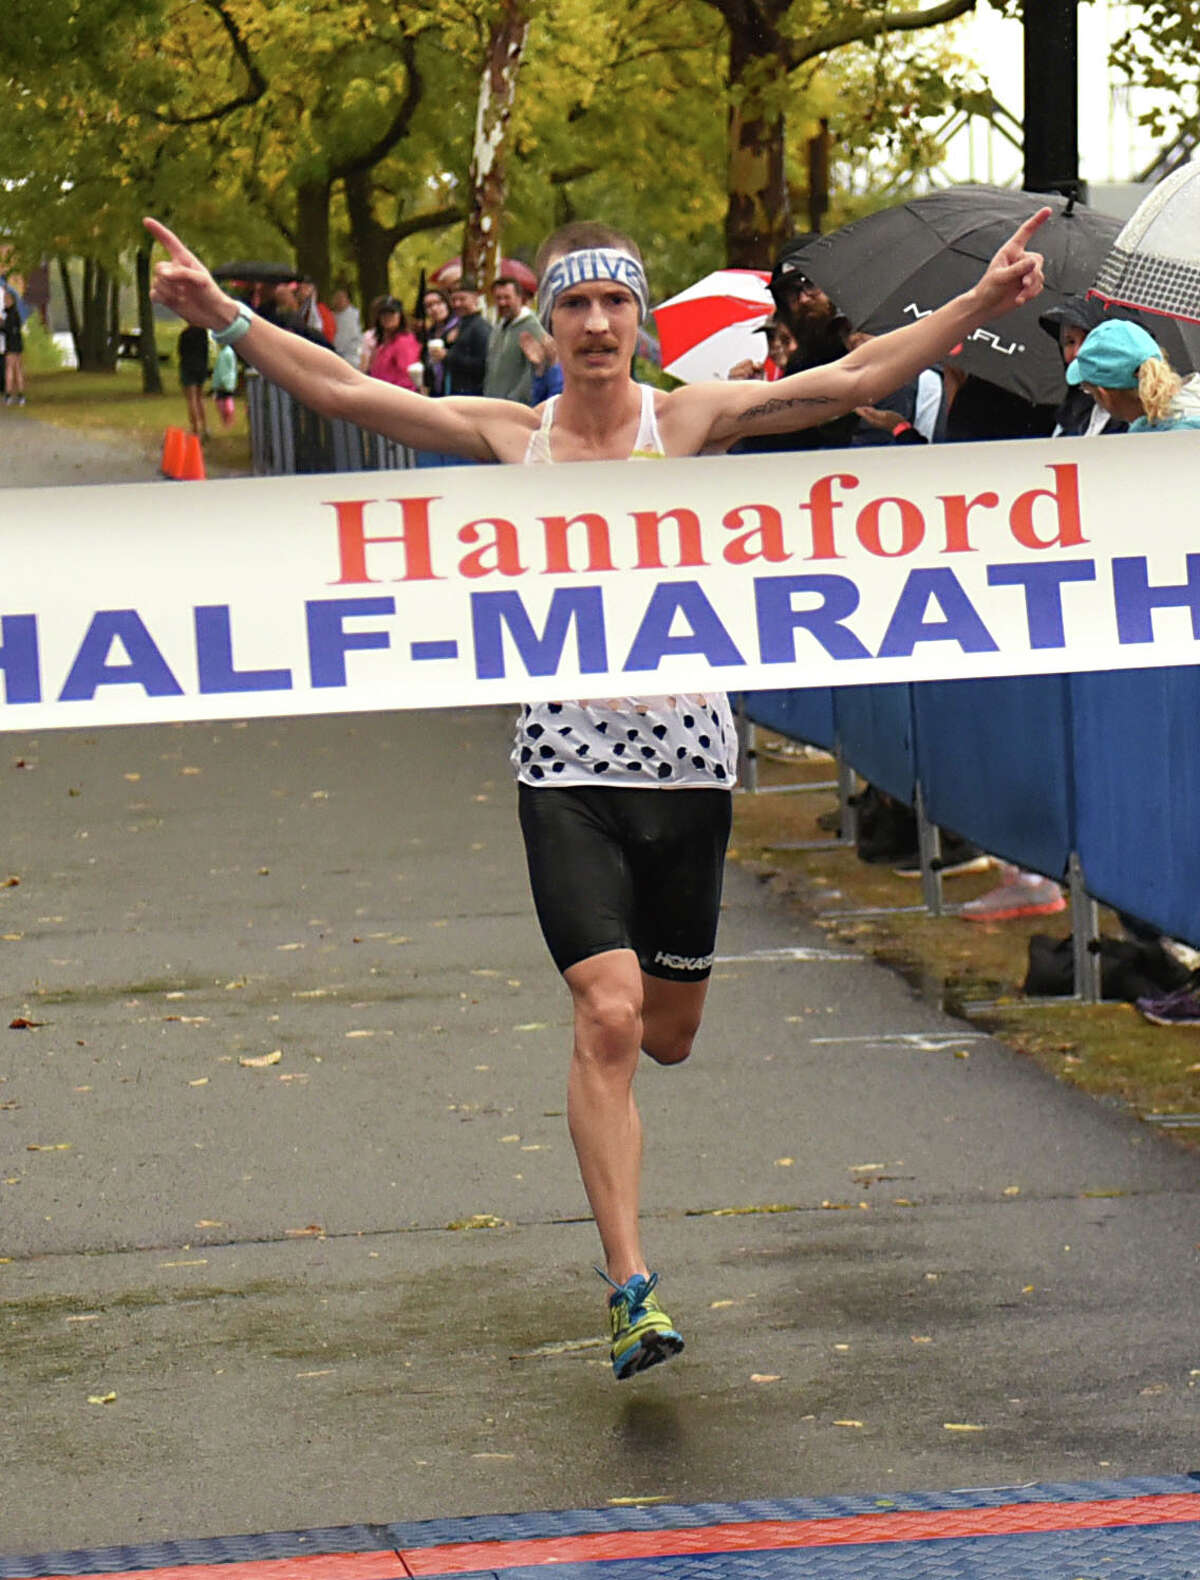 Tyler Andrews of Arlington, VA makes his way across the finish line as the men's Hannaford Half-Marathon winner at 1:07:33 at the Corning Preserve on Sunday, Oct. 8, 2017 in Albany, N.Y. The half marathon runners started at Colonie Town Park in Cohoes. (Lori Van Buren / Times Union)